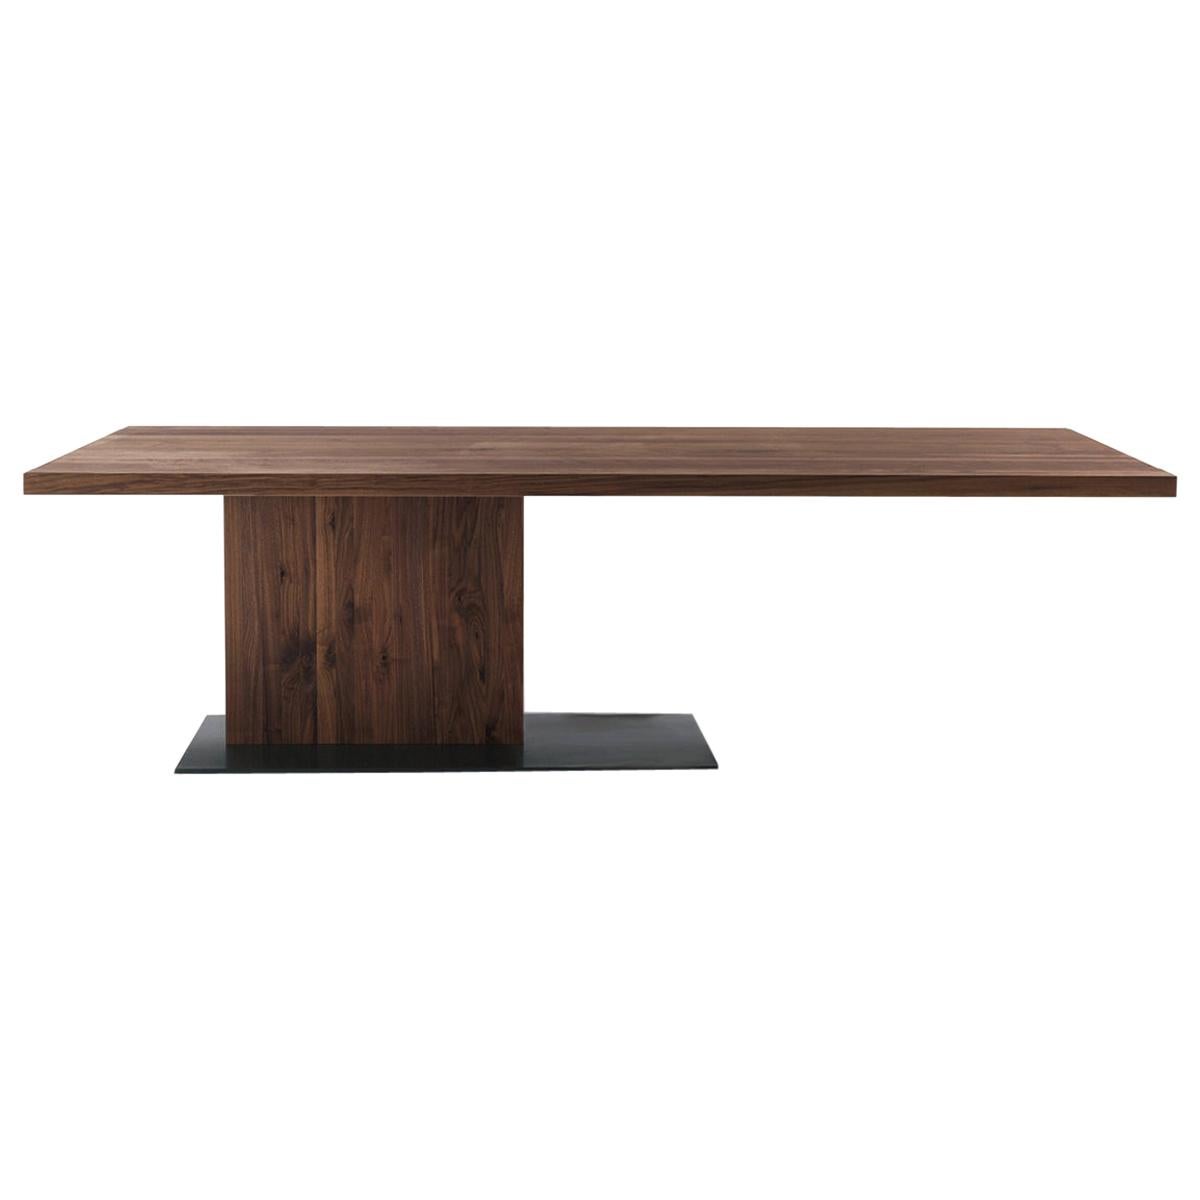 Stage Walnut Dining Table For Sale